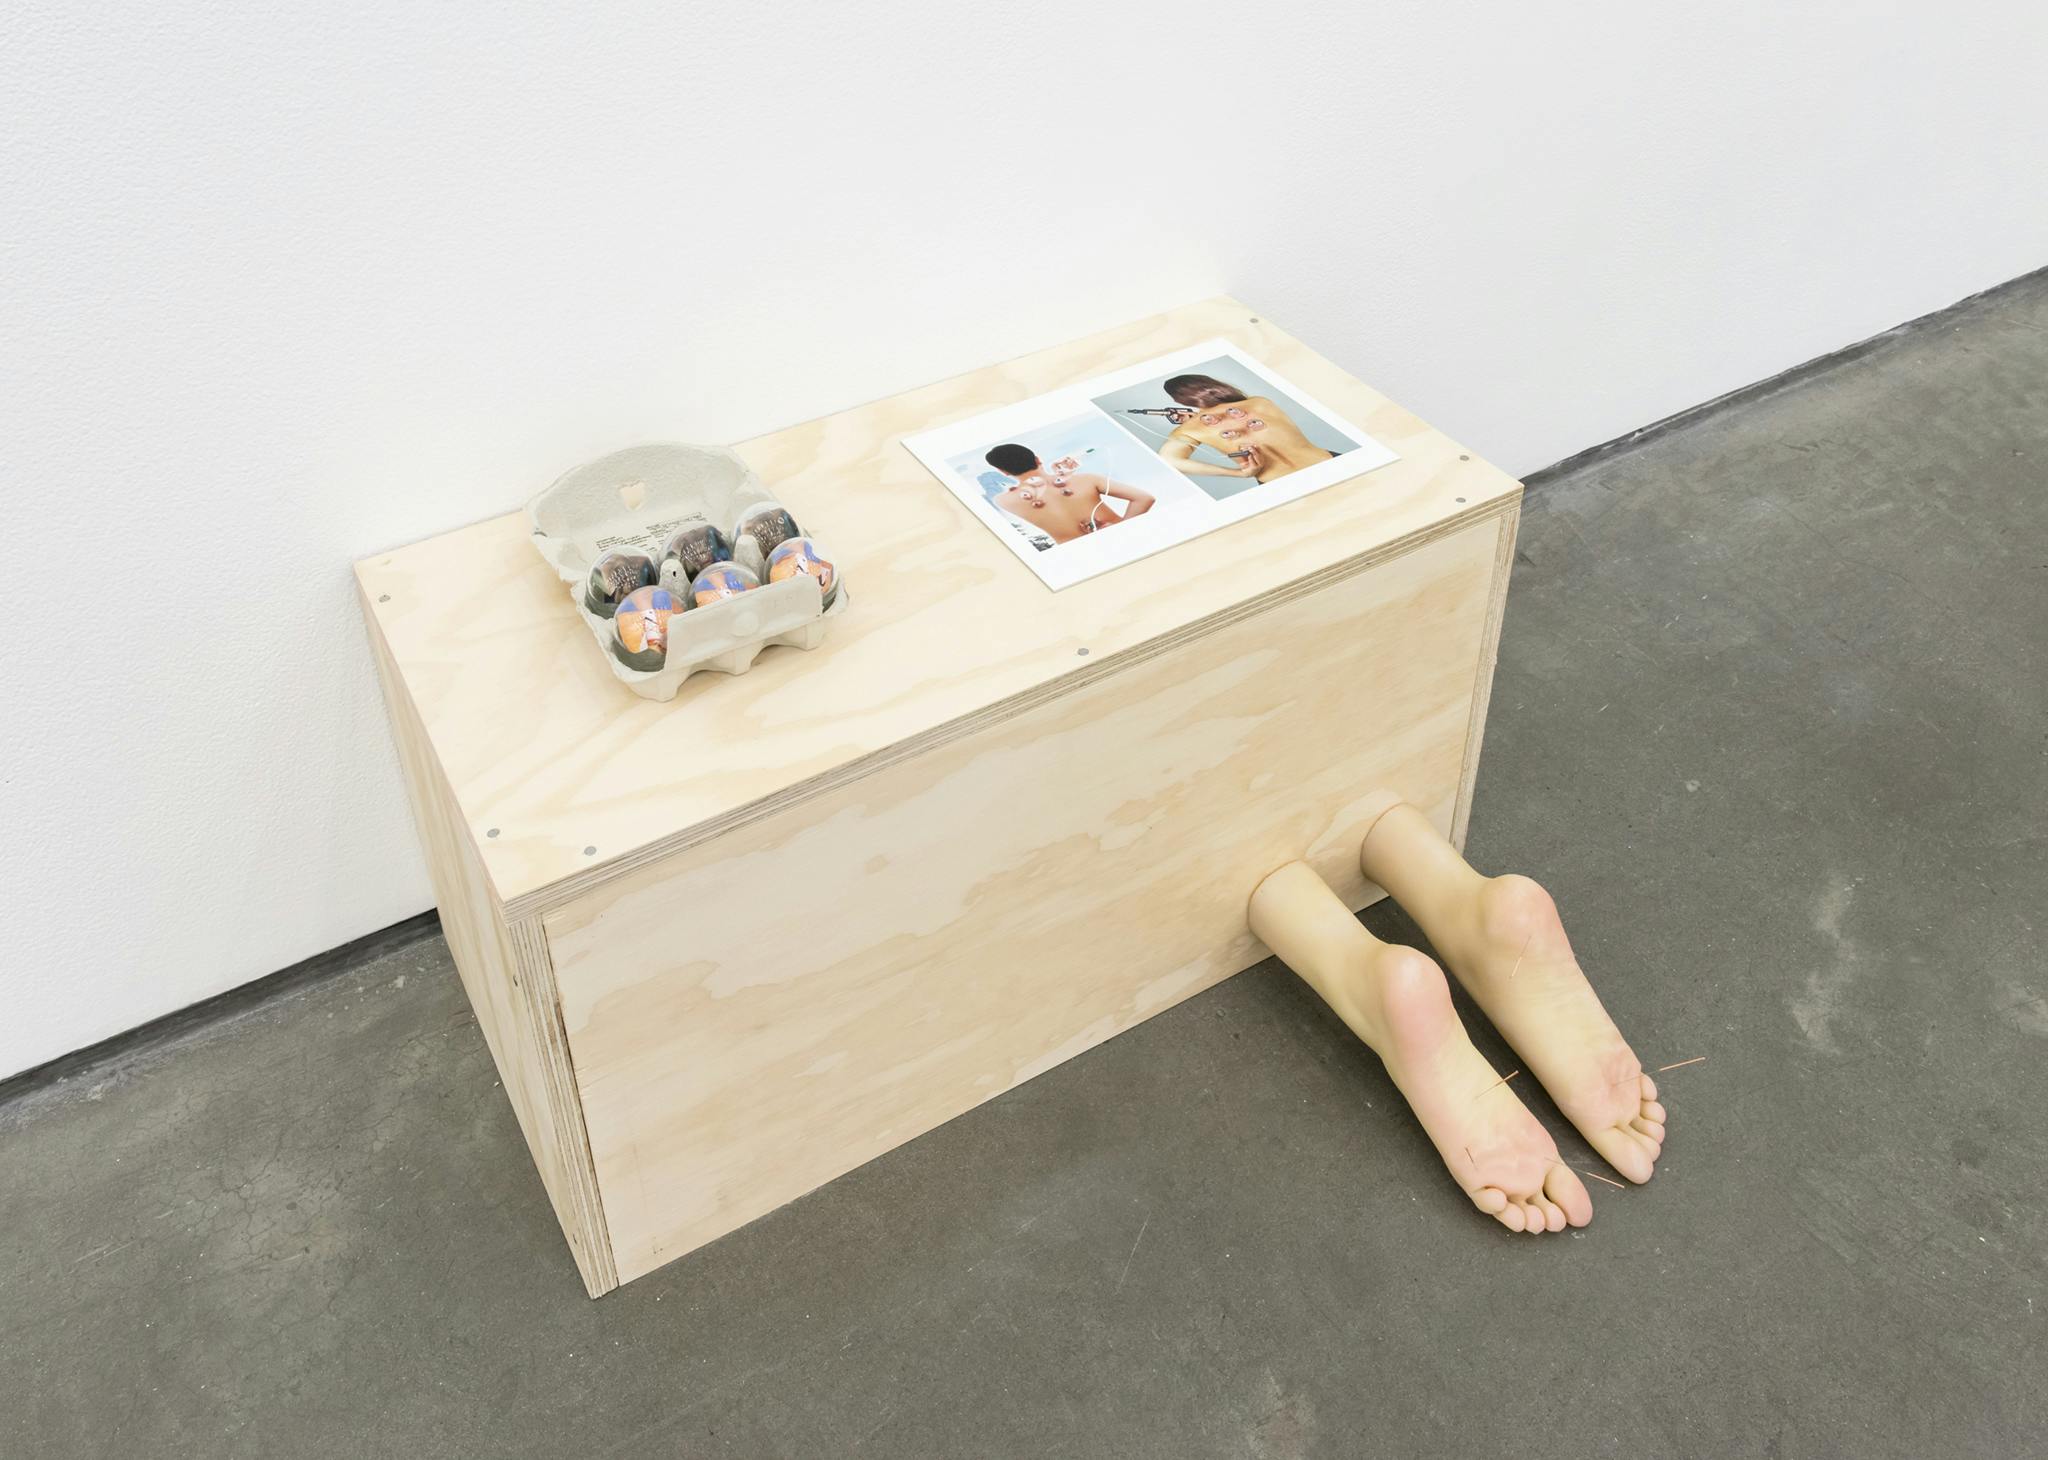 A sculpture sits on the floor against a wall of a gallery. The sculpture is a wooden box with prosthetic feet protruding out in front. Two photographs of people’s backs and an egg carton sit on top. 